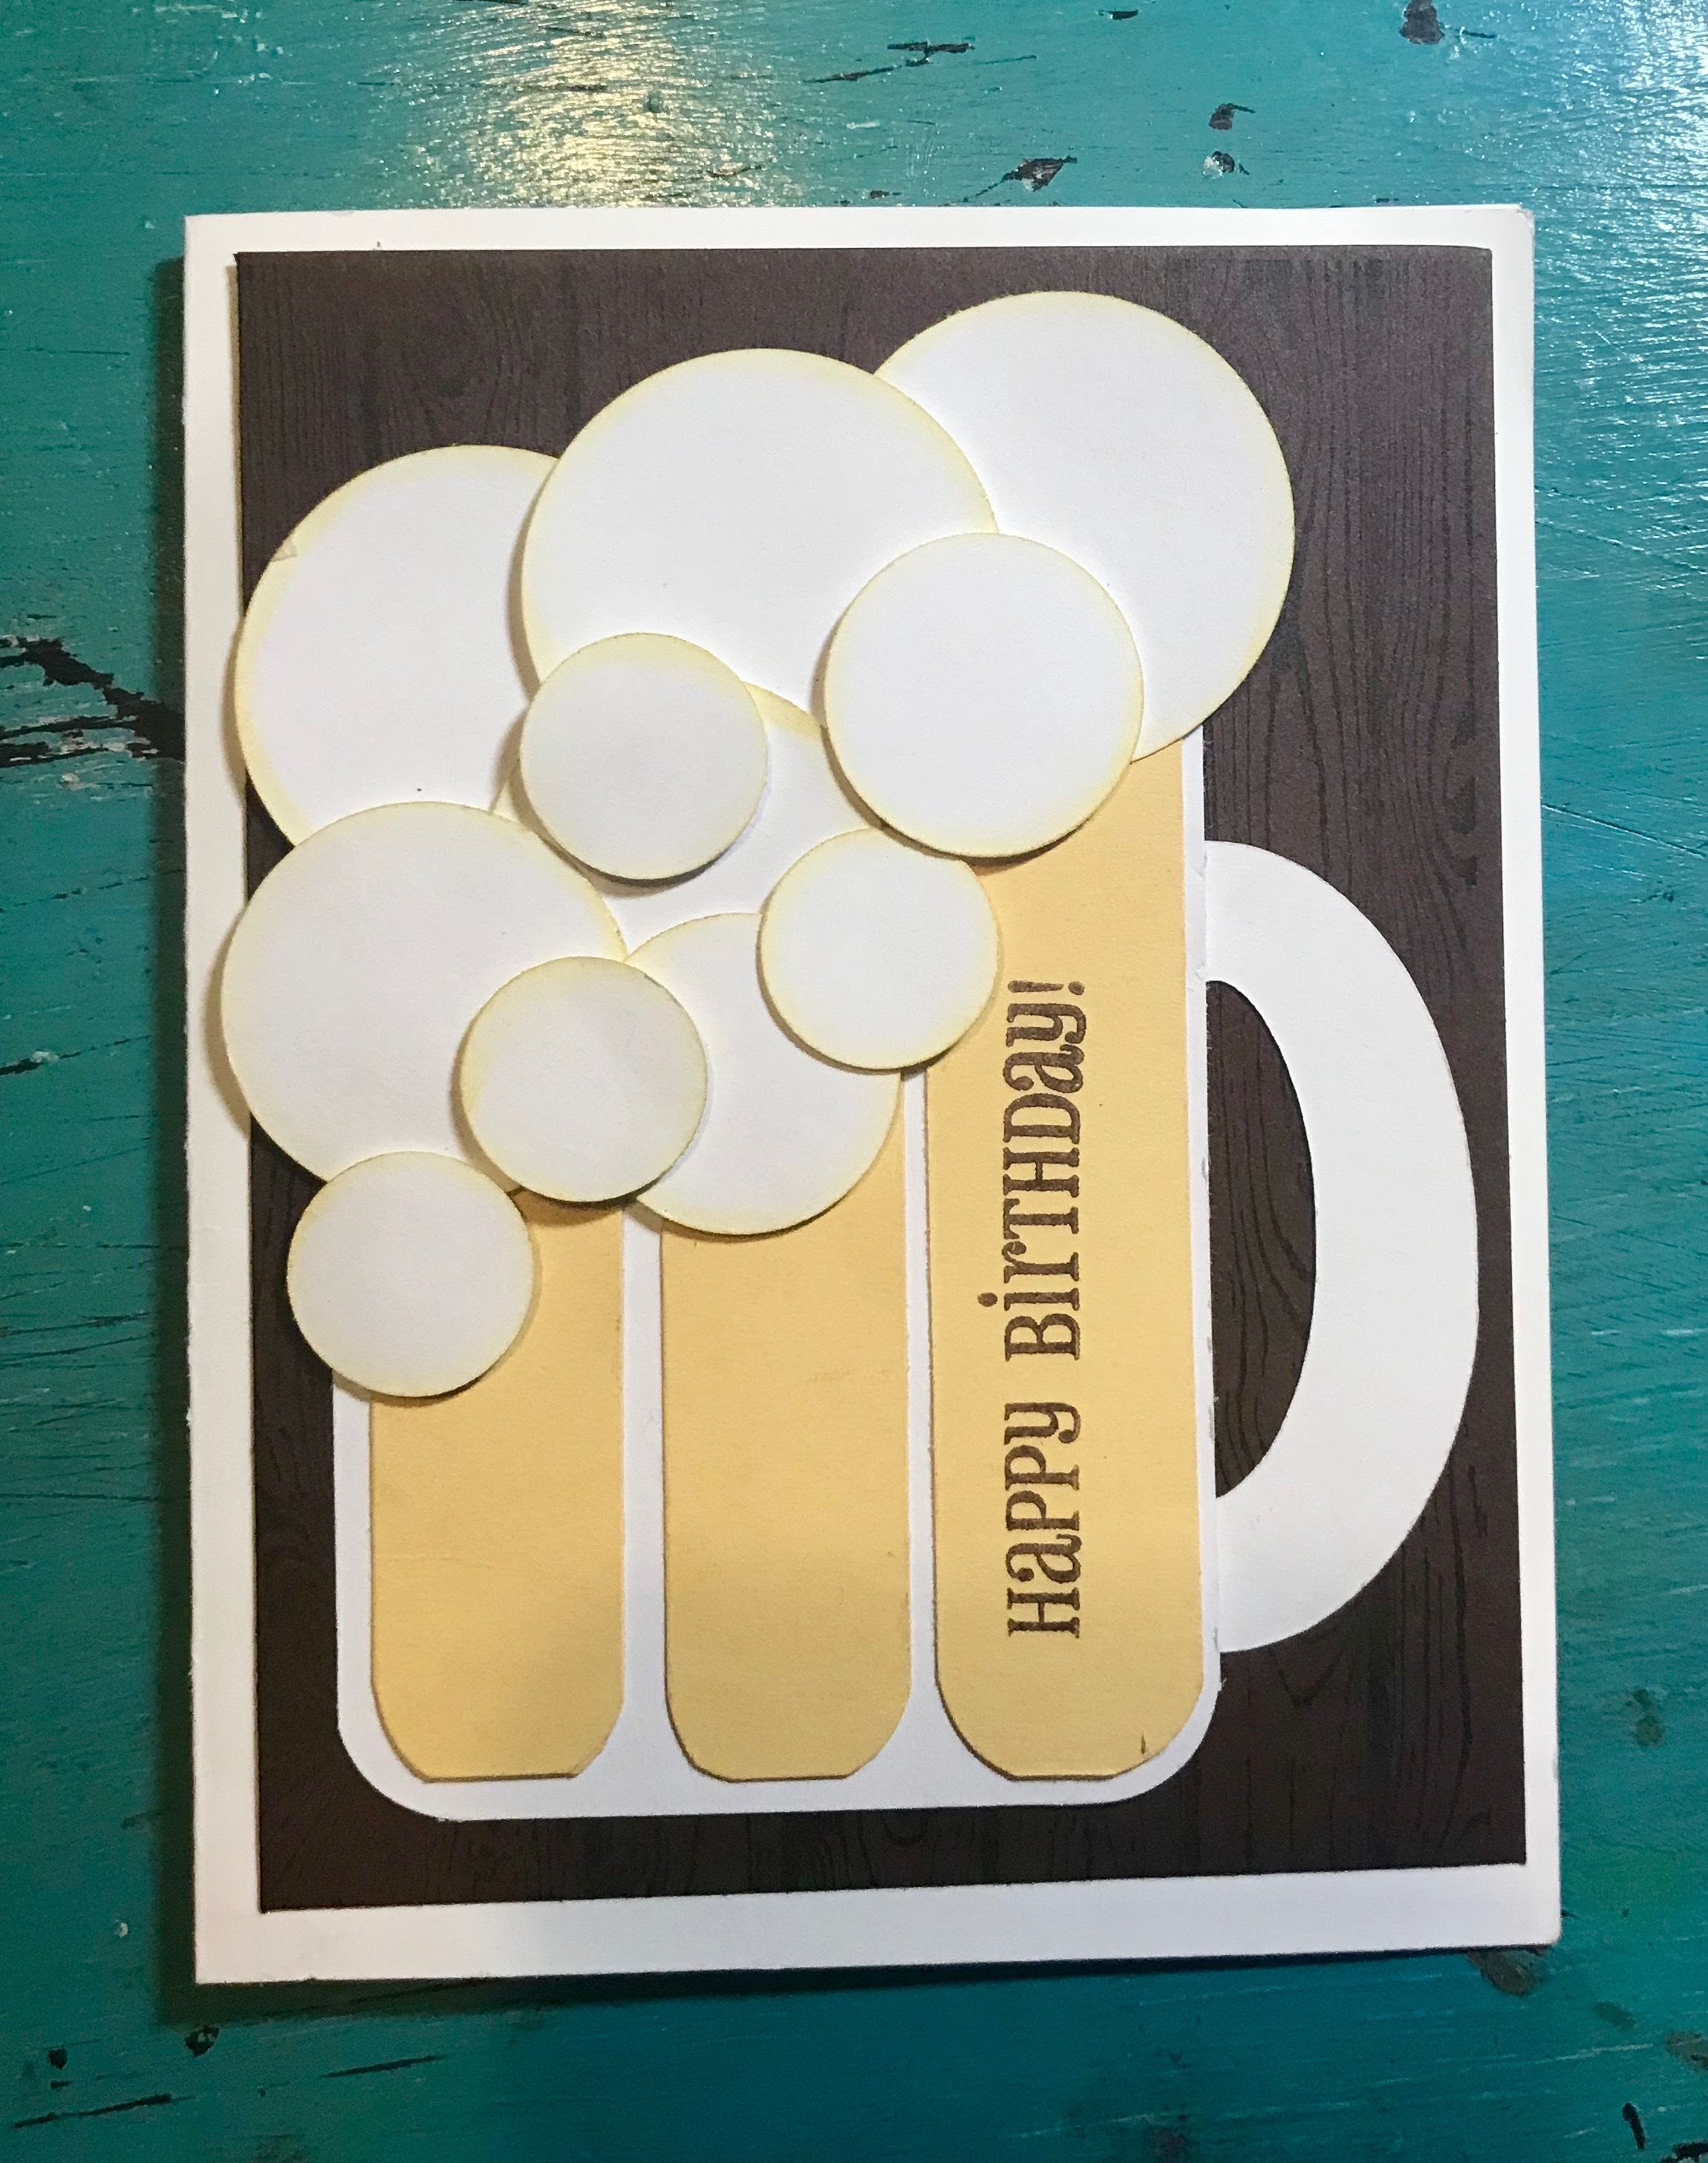 My version of the “beer” card Beer card, Paper crafts, Cards